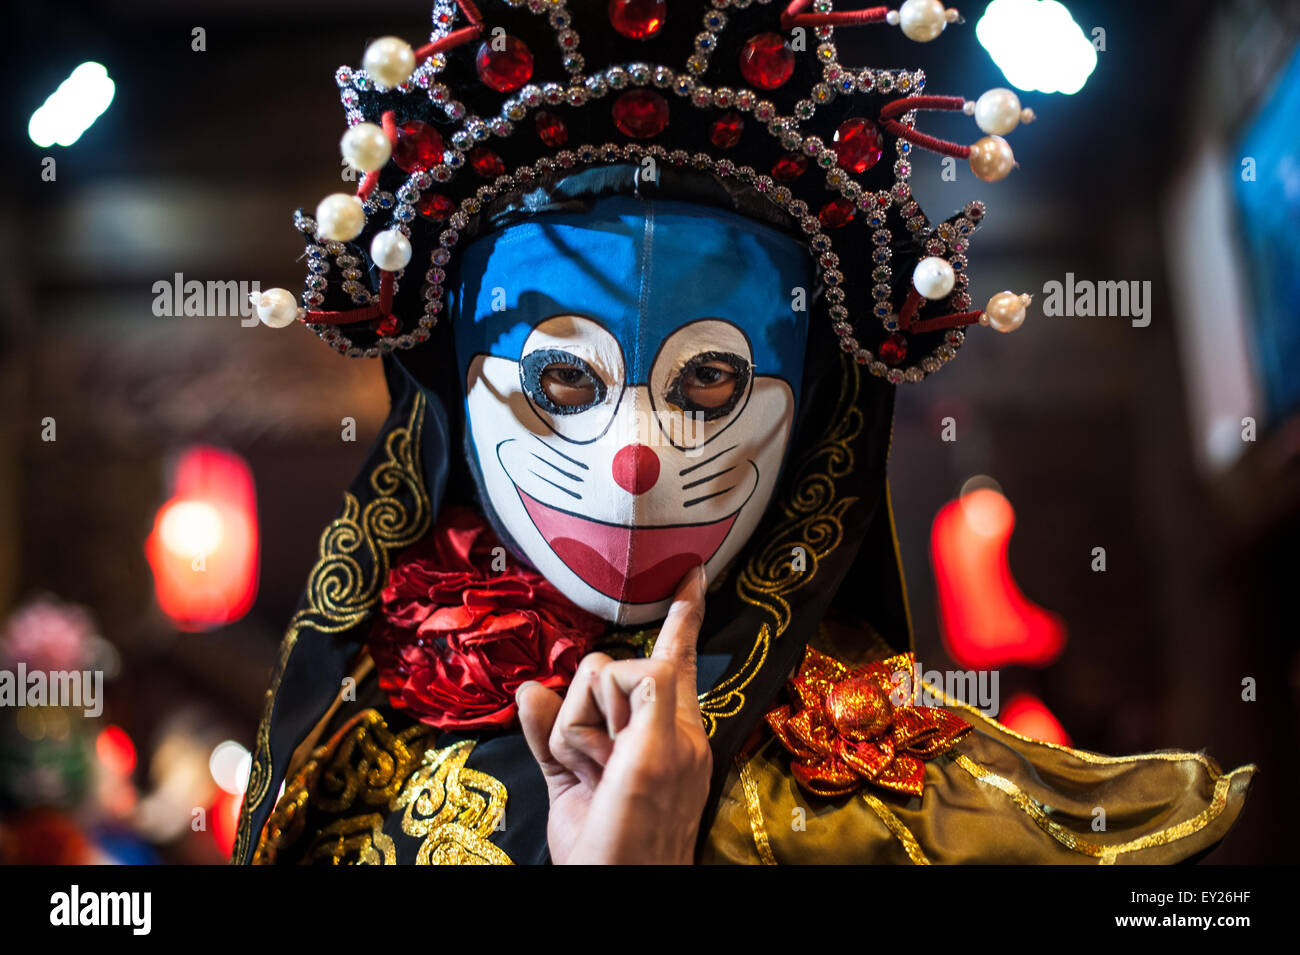 Chengdu, Sichuan Province, China - December 29, 2014: Chinese artist performs traditional face-changing art or bianlian onstage Stock Photo